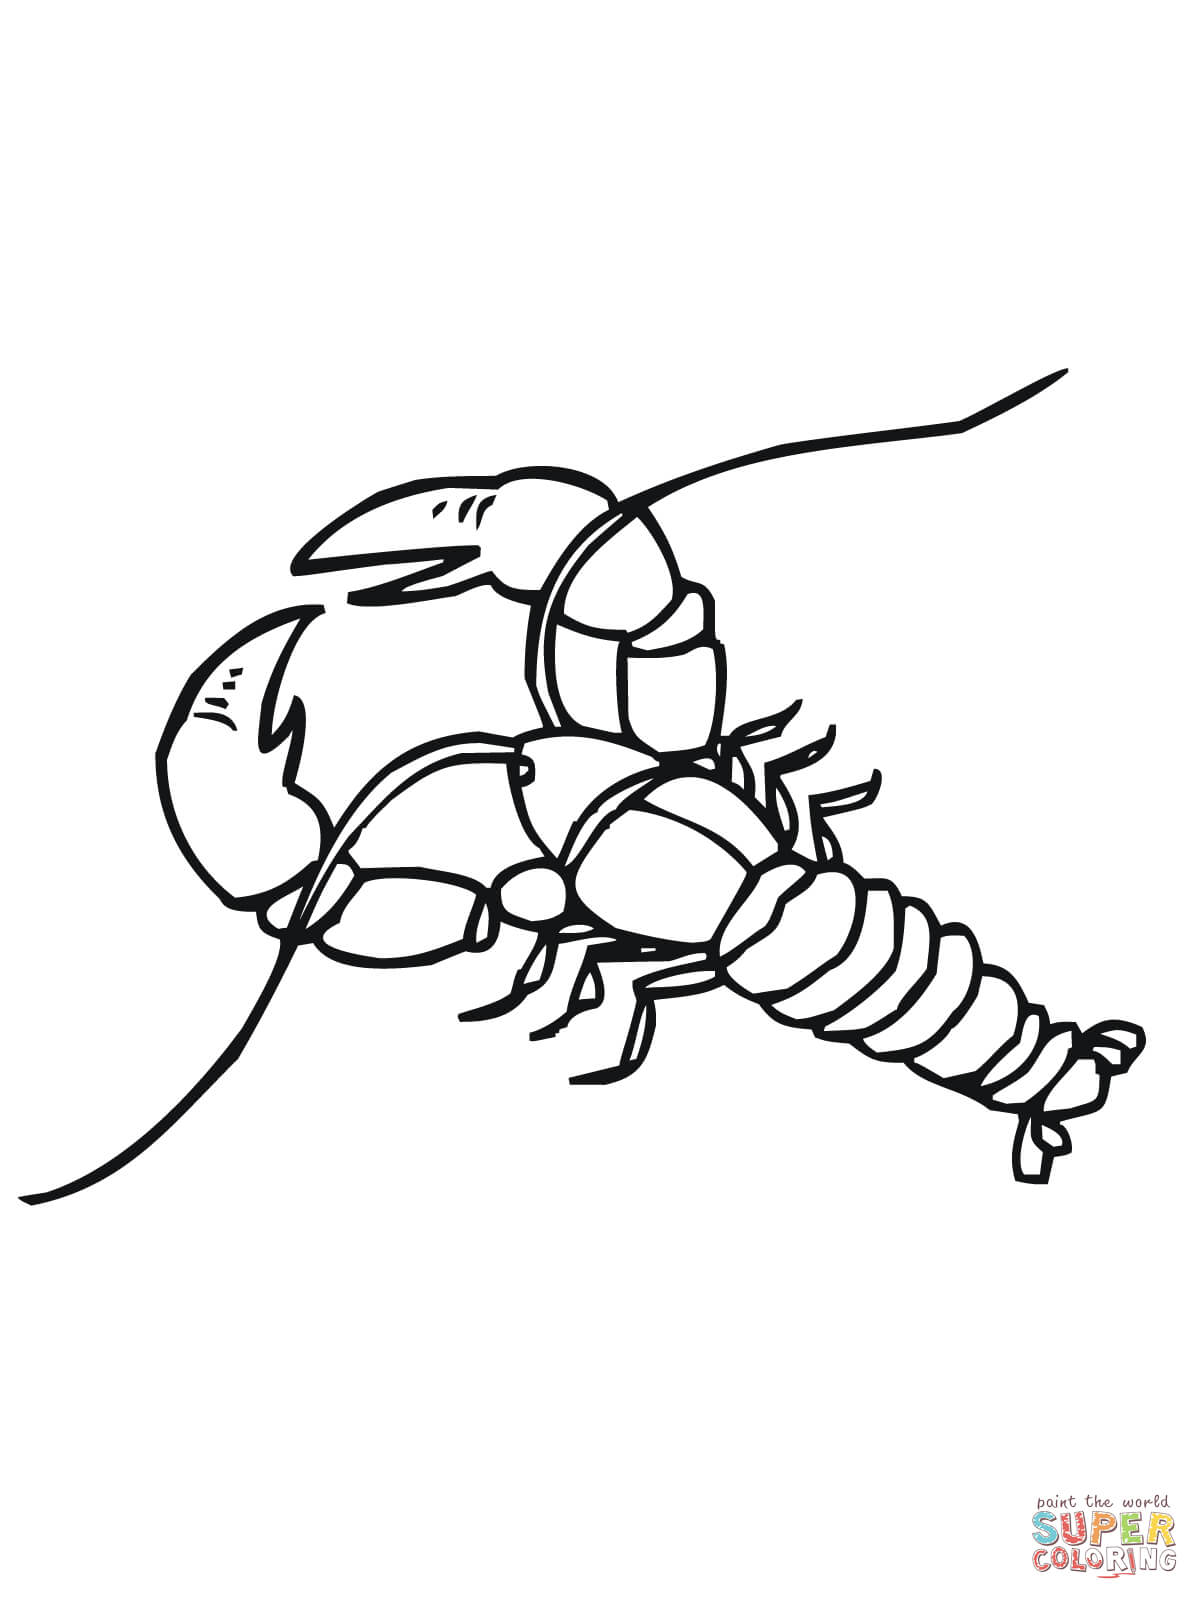 Danube Crayfish coloring page | Free Printable Coloring Pages